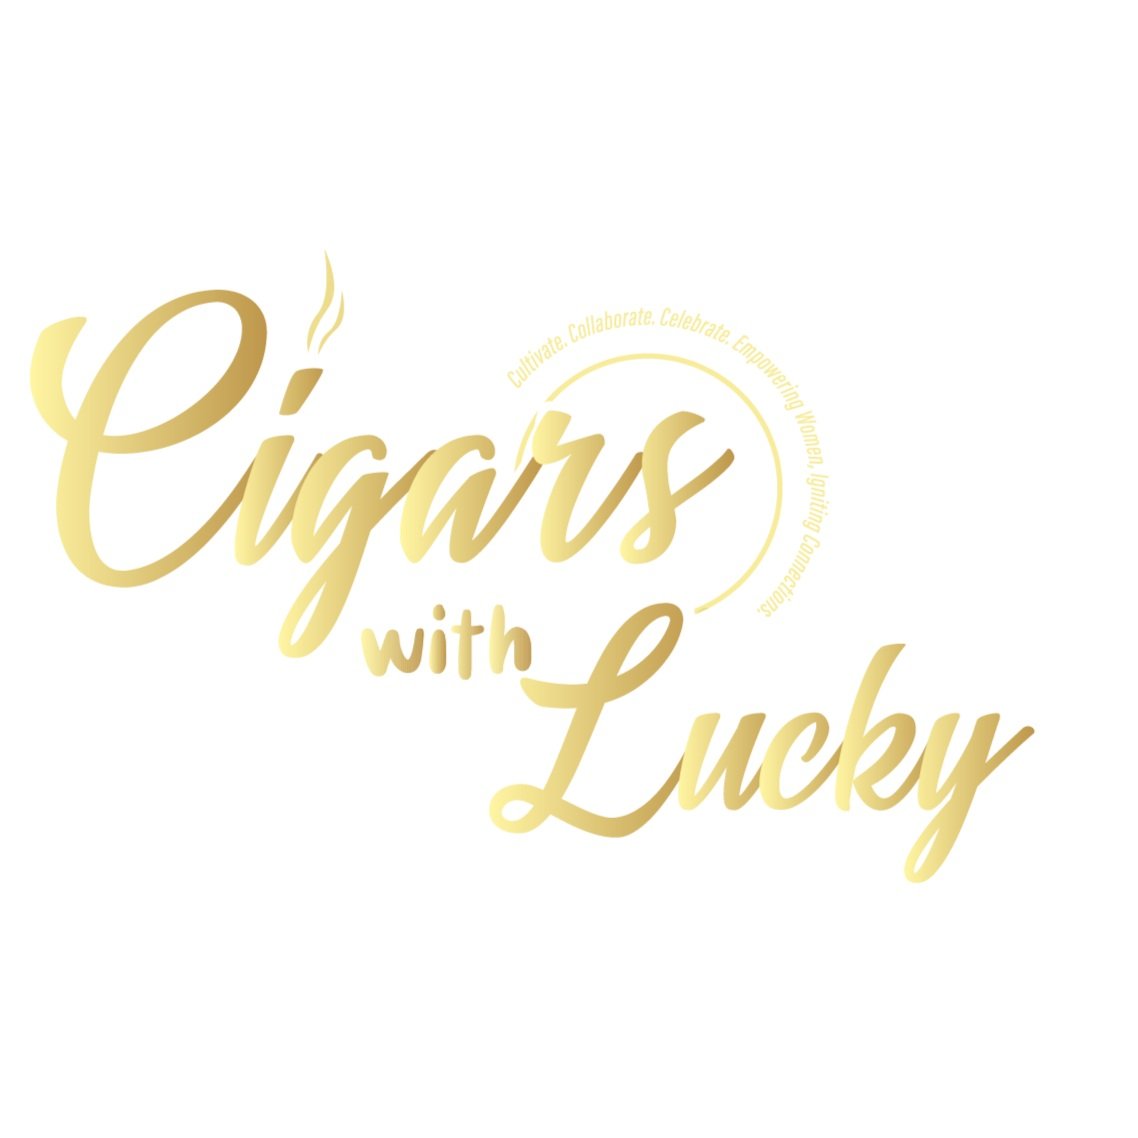 Cigars With Lucky